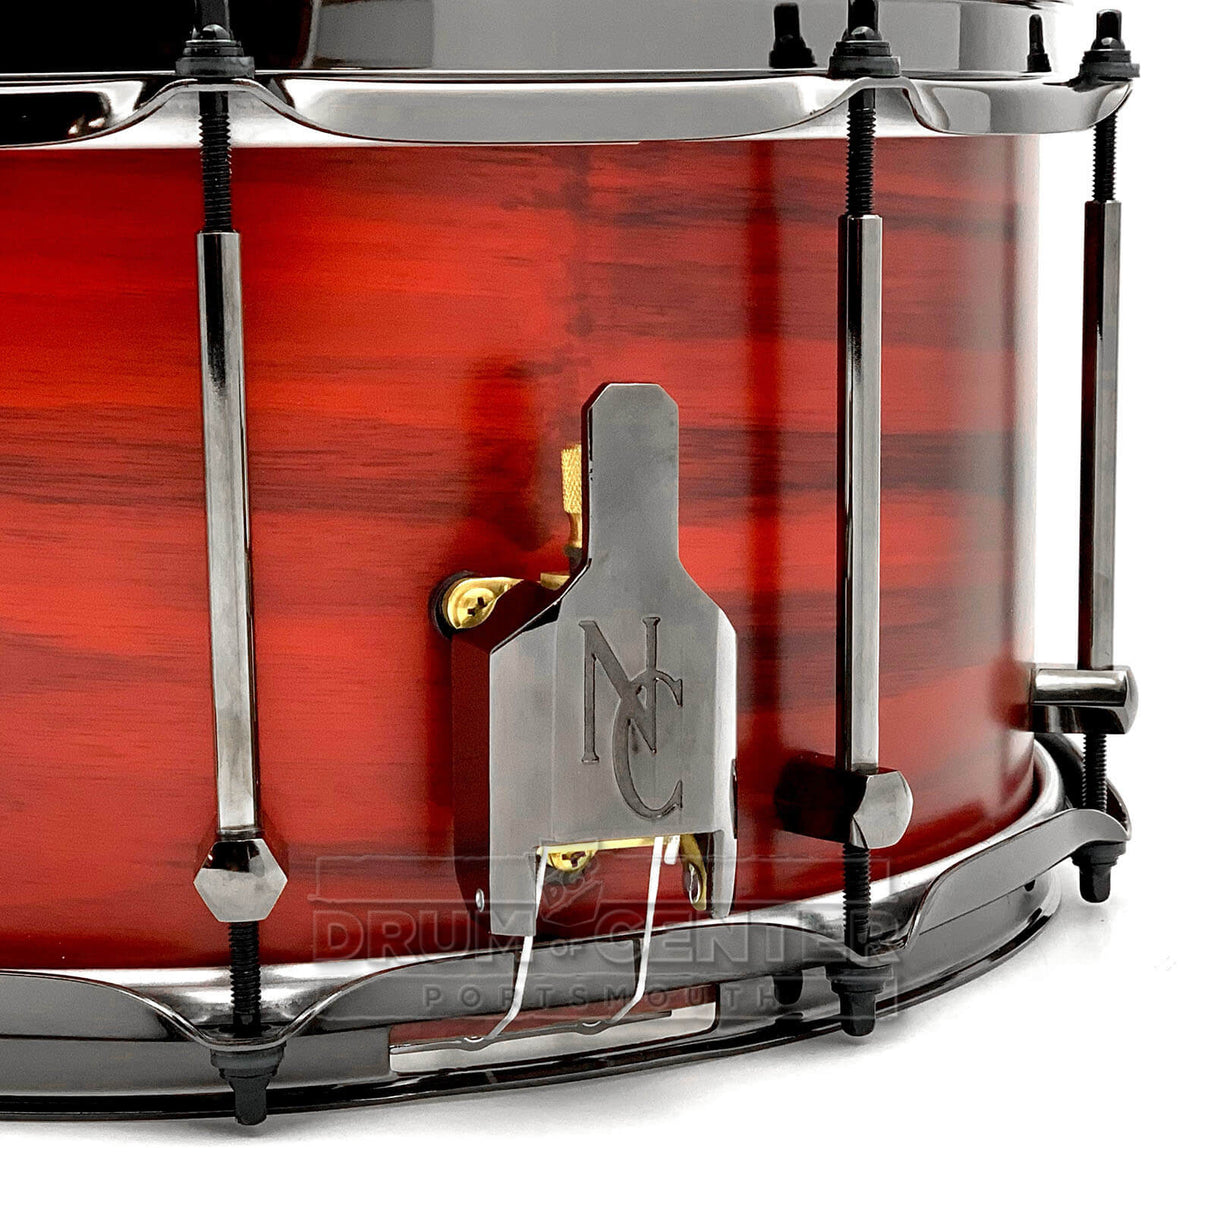 Noble & Cooley Solid Shell Classic Walnut Snare Drum 14x7 Trans Red Super Matte w/Black Hw - Drum Center Of Portsmouth